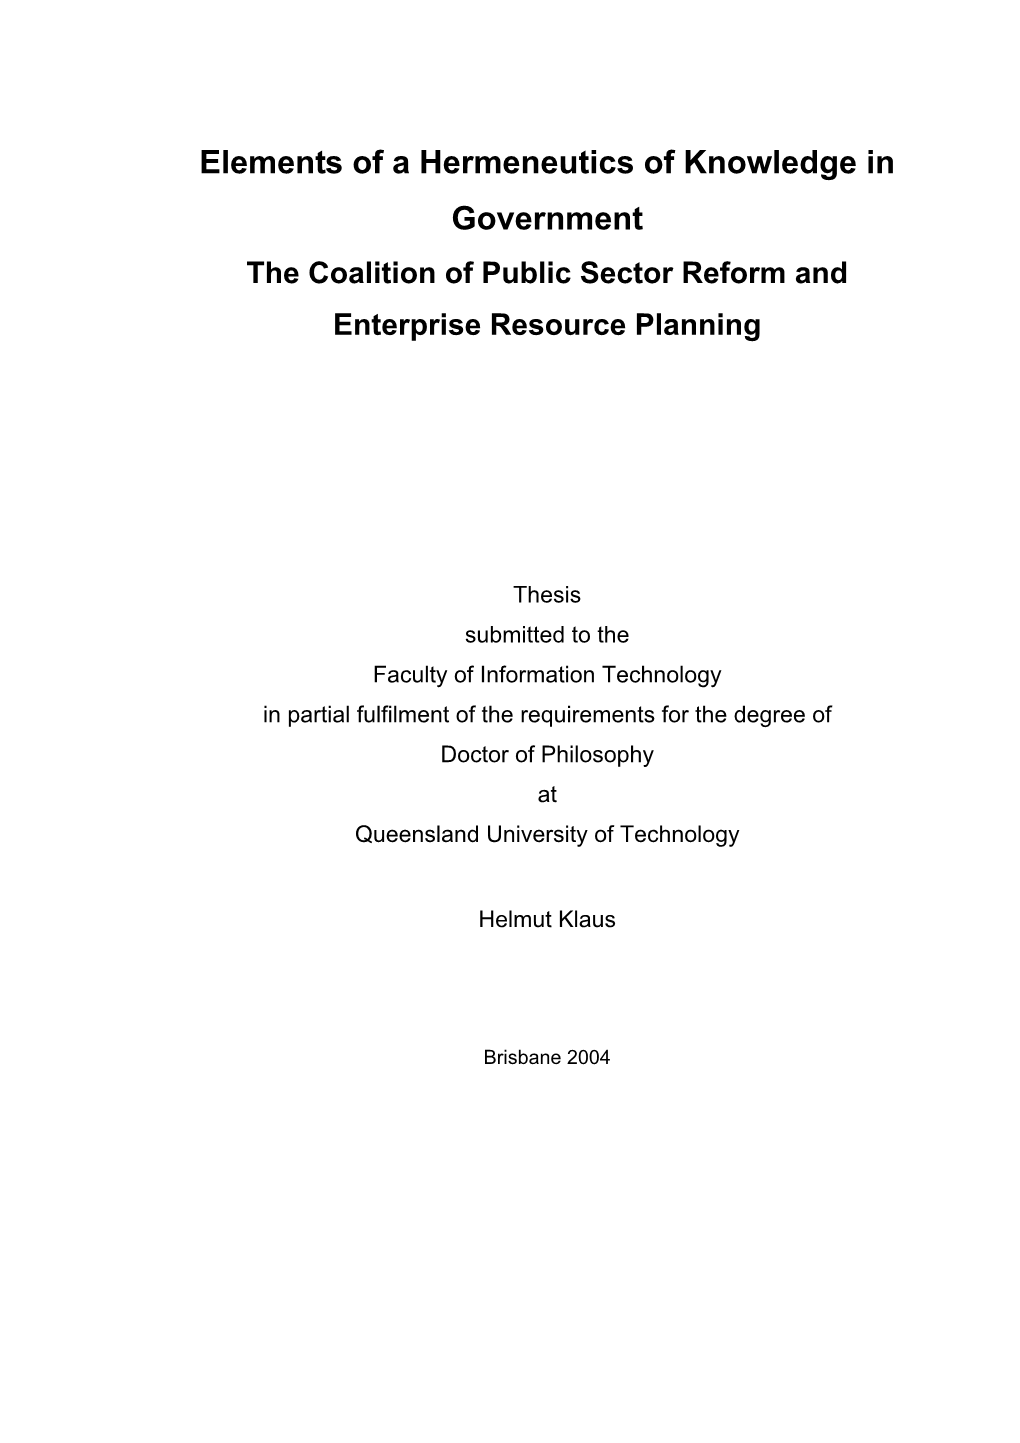 Elements of a Hermeneutics of Knowledge in Government the Coalition of Public Sector Reform and Enterprise Resource Planning